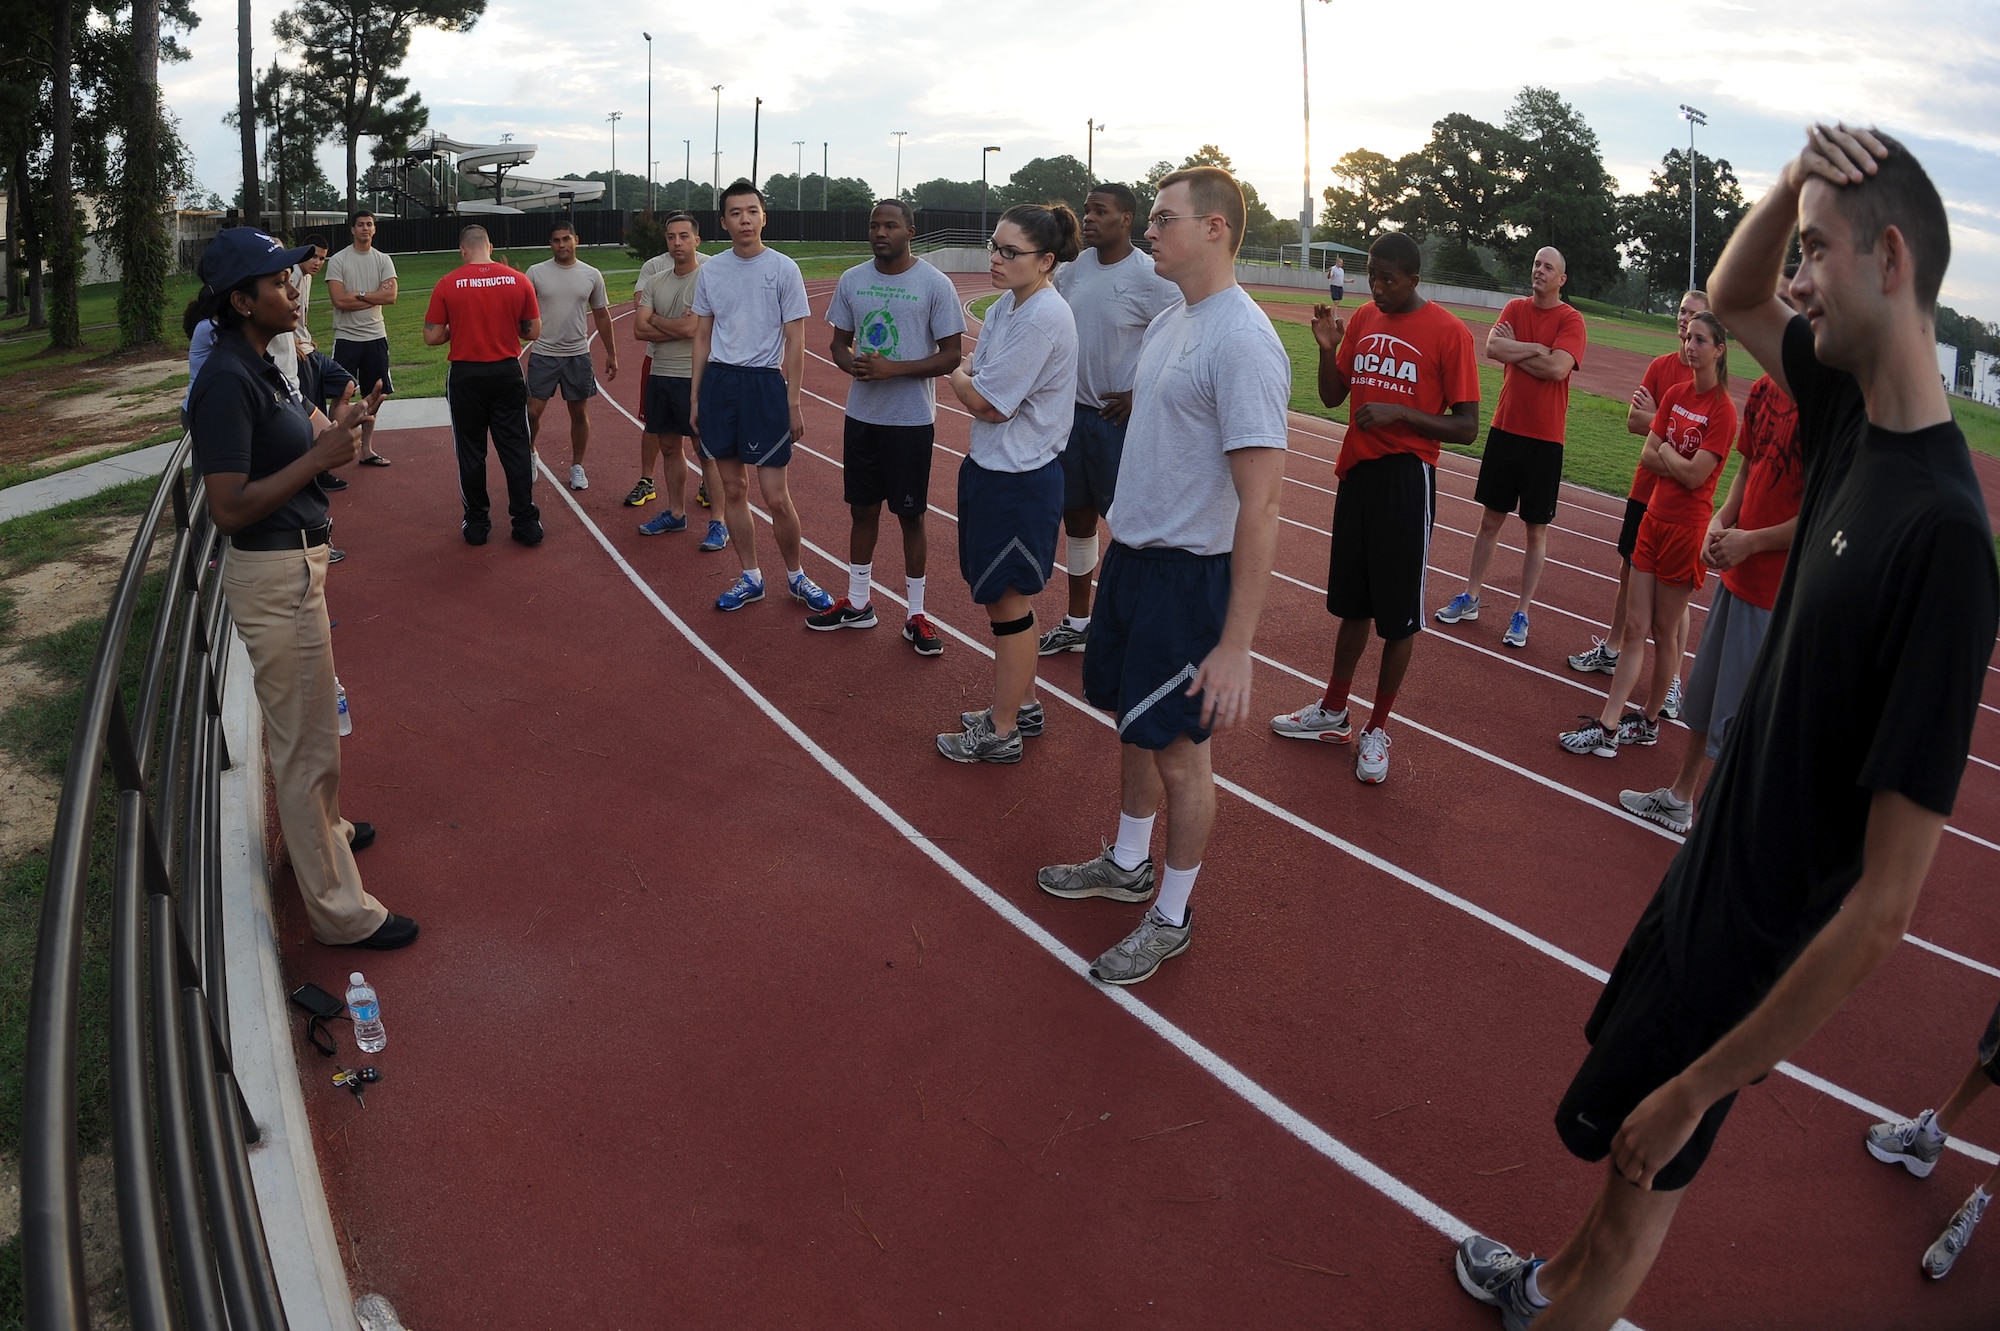 U.S. Air Force Senior Airman Leah Williams (left), 4th Force Support Squadron services journeyman, gives a briefing on the rules for the Beat the Heat relay run at Seymour Johnson Air Force Base, N.C., Aug. 10, 2012. Teams consisted of five individuals with a minimum of one female. (U.S. Air Force photo/Airman 1st Class John Nieves Camacho/Released)